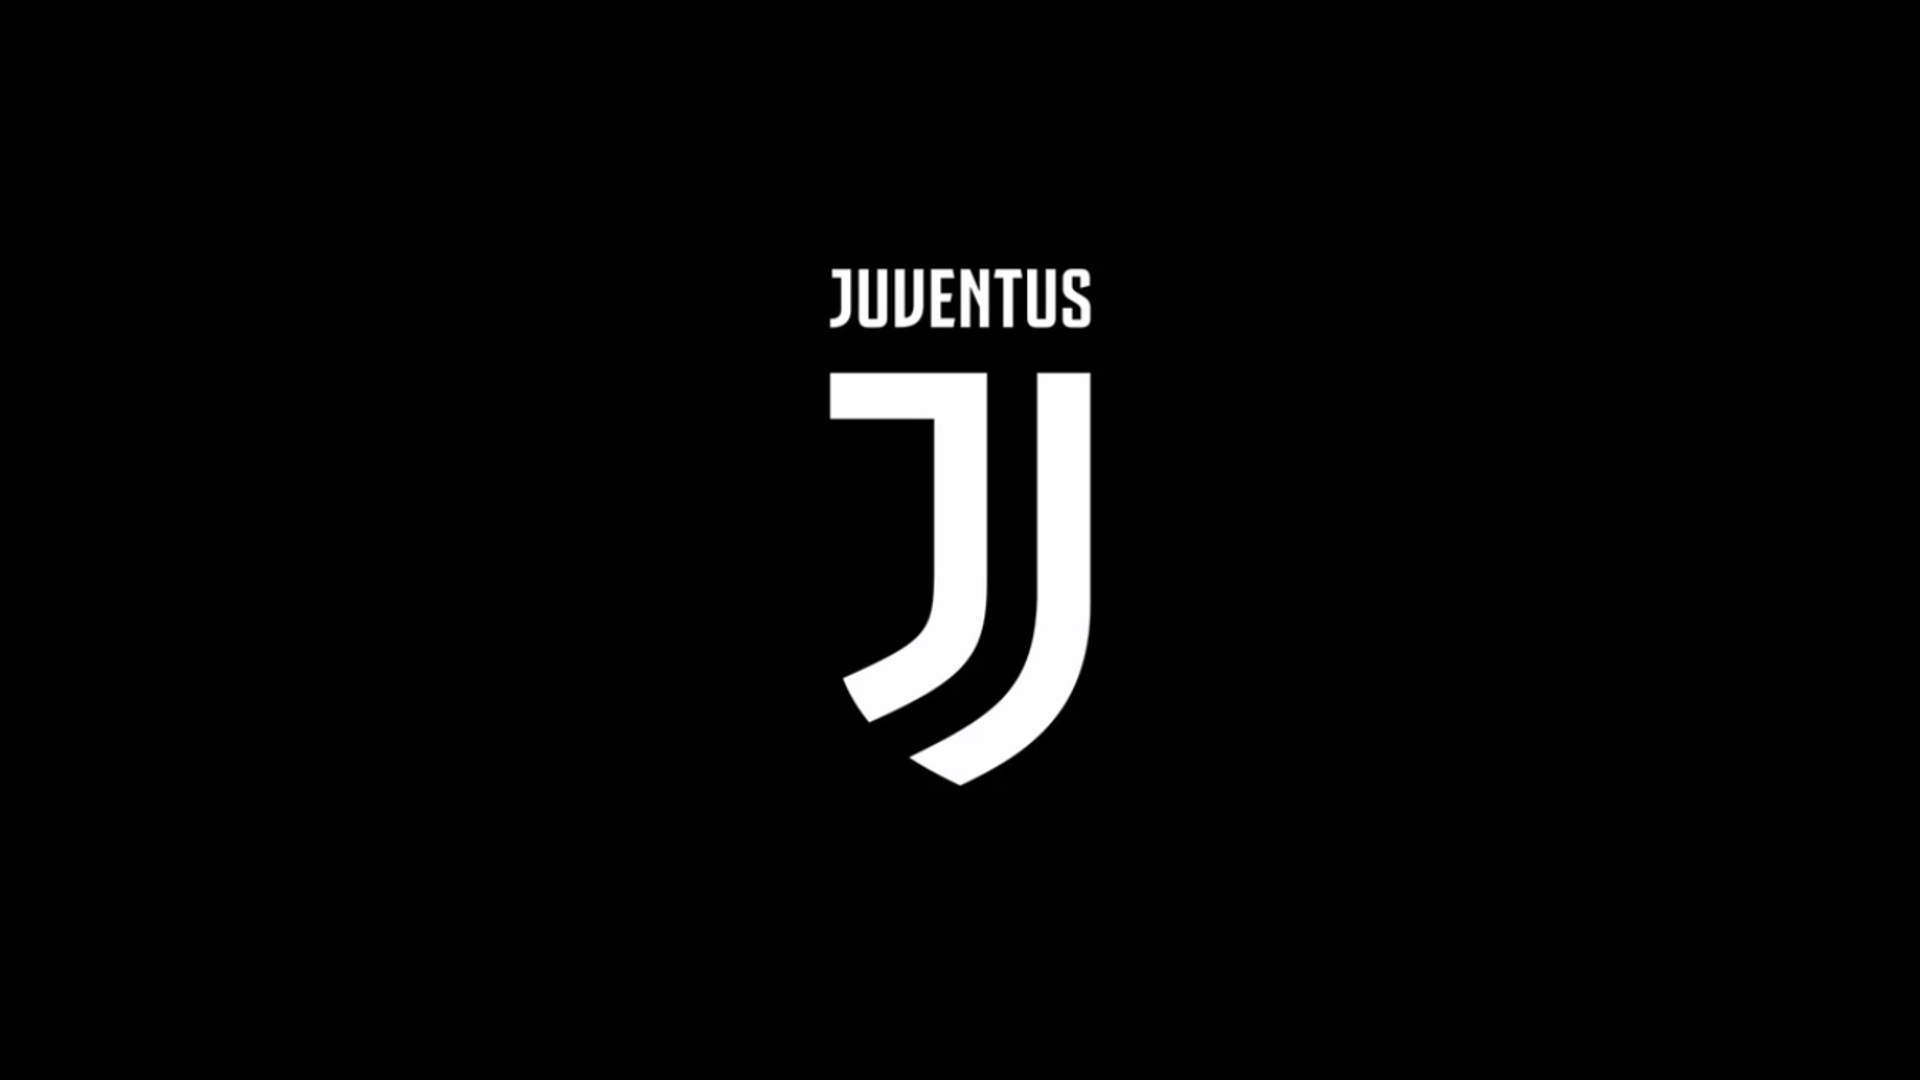 http://images.performgroup.com/di/library/GOAL/f6/8a/new-juventus-logo_ltar5e1hf5s612hr3iniq3831.png?t=-1457843599&%3Bw=620&%3Bh=430